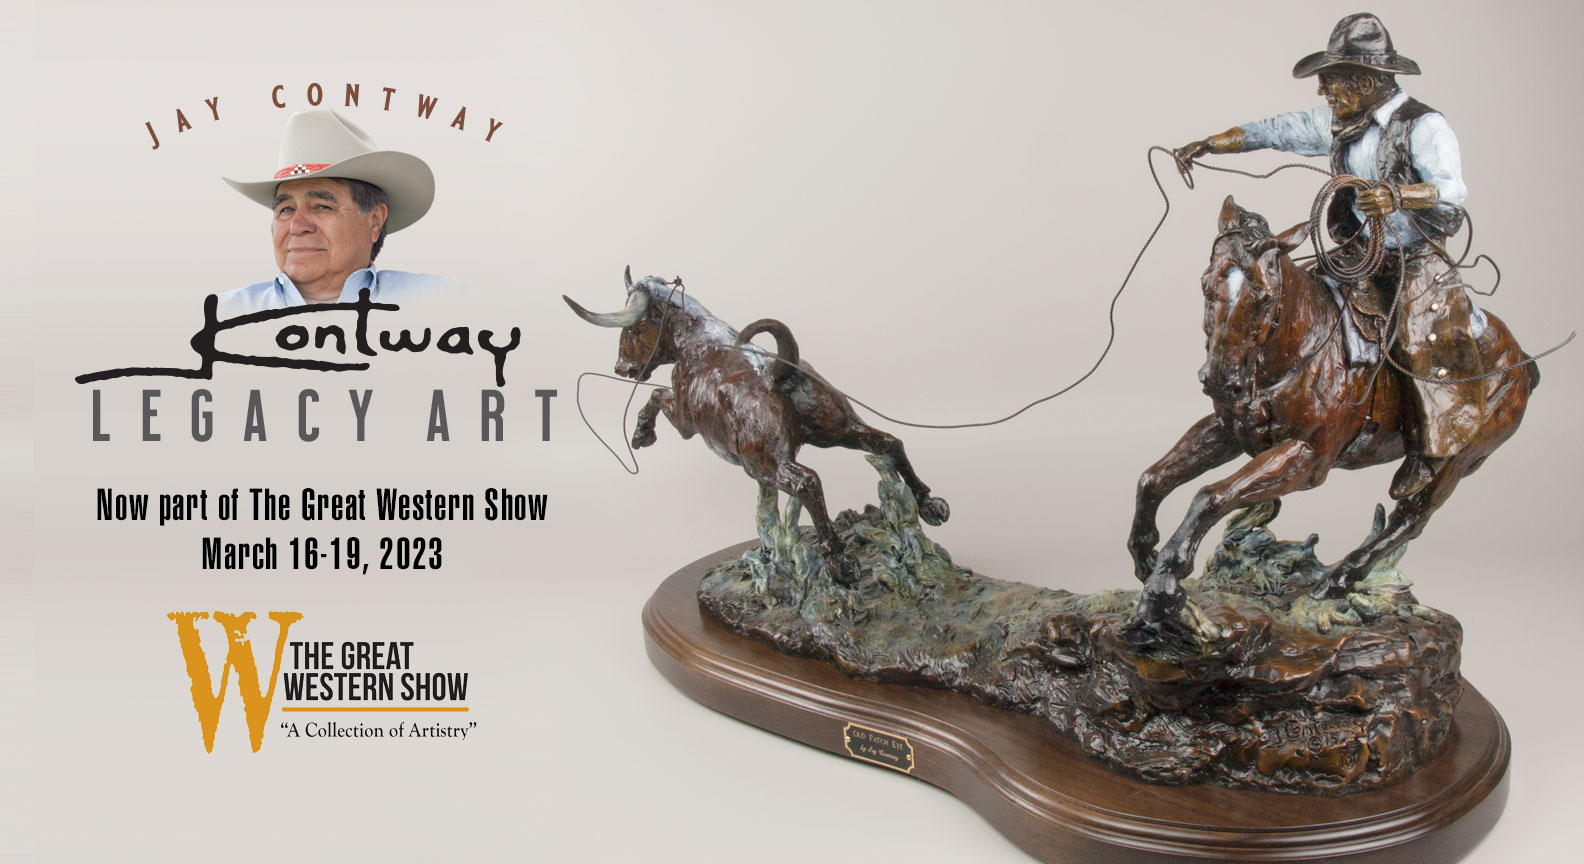 The 2023 Jay Contway Legacy Art Show